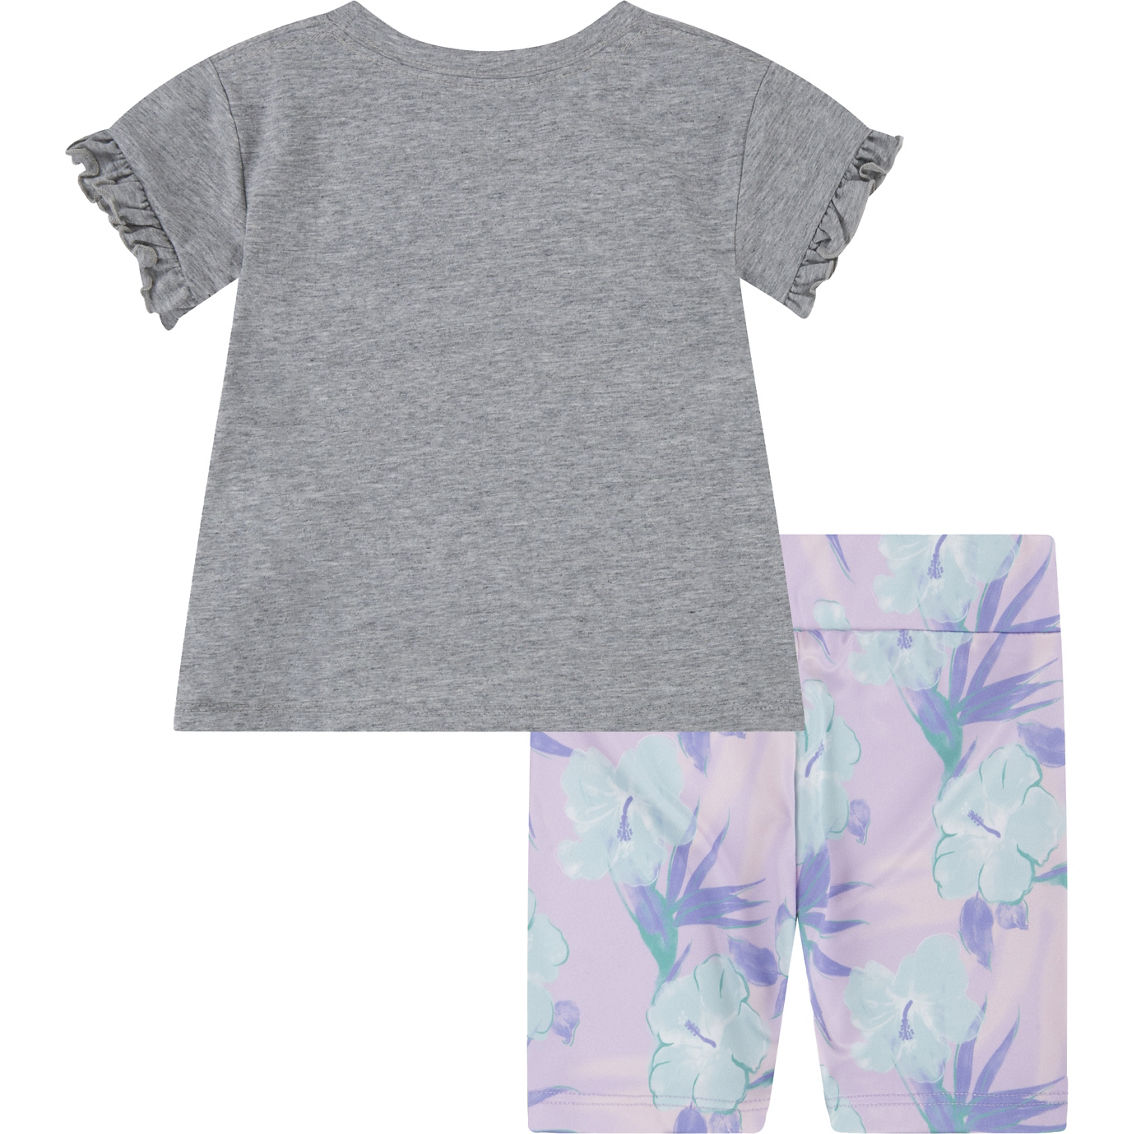 Hurley Toddler Girls Top and Bike Shorts 2 pc. Set - Image 2 of 4